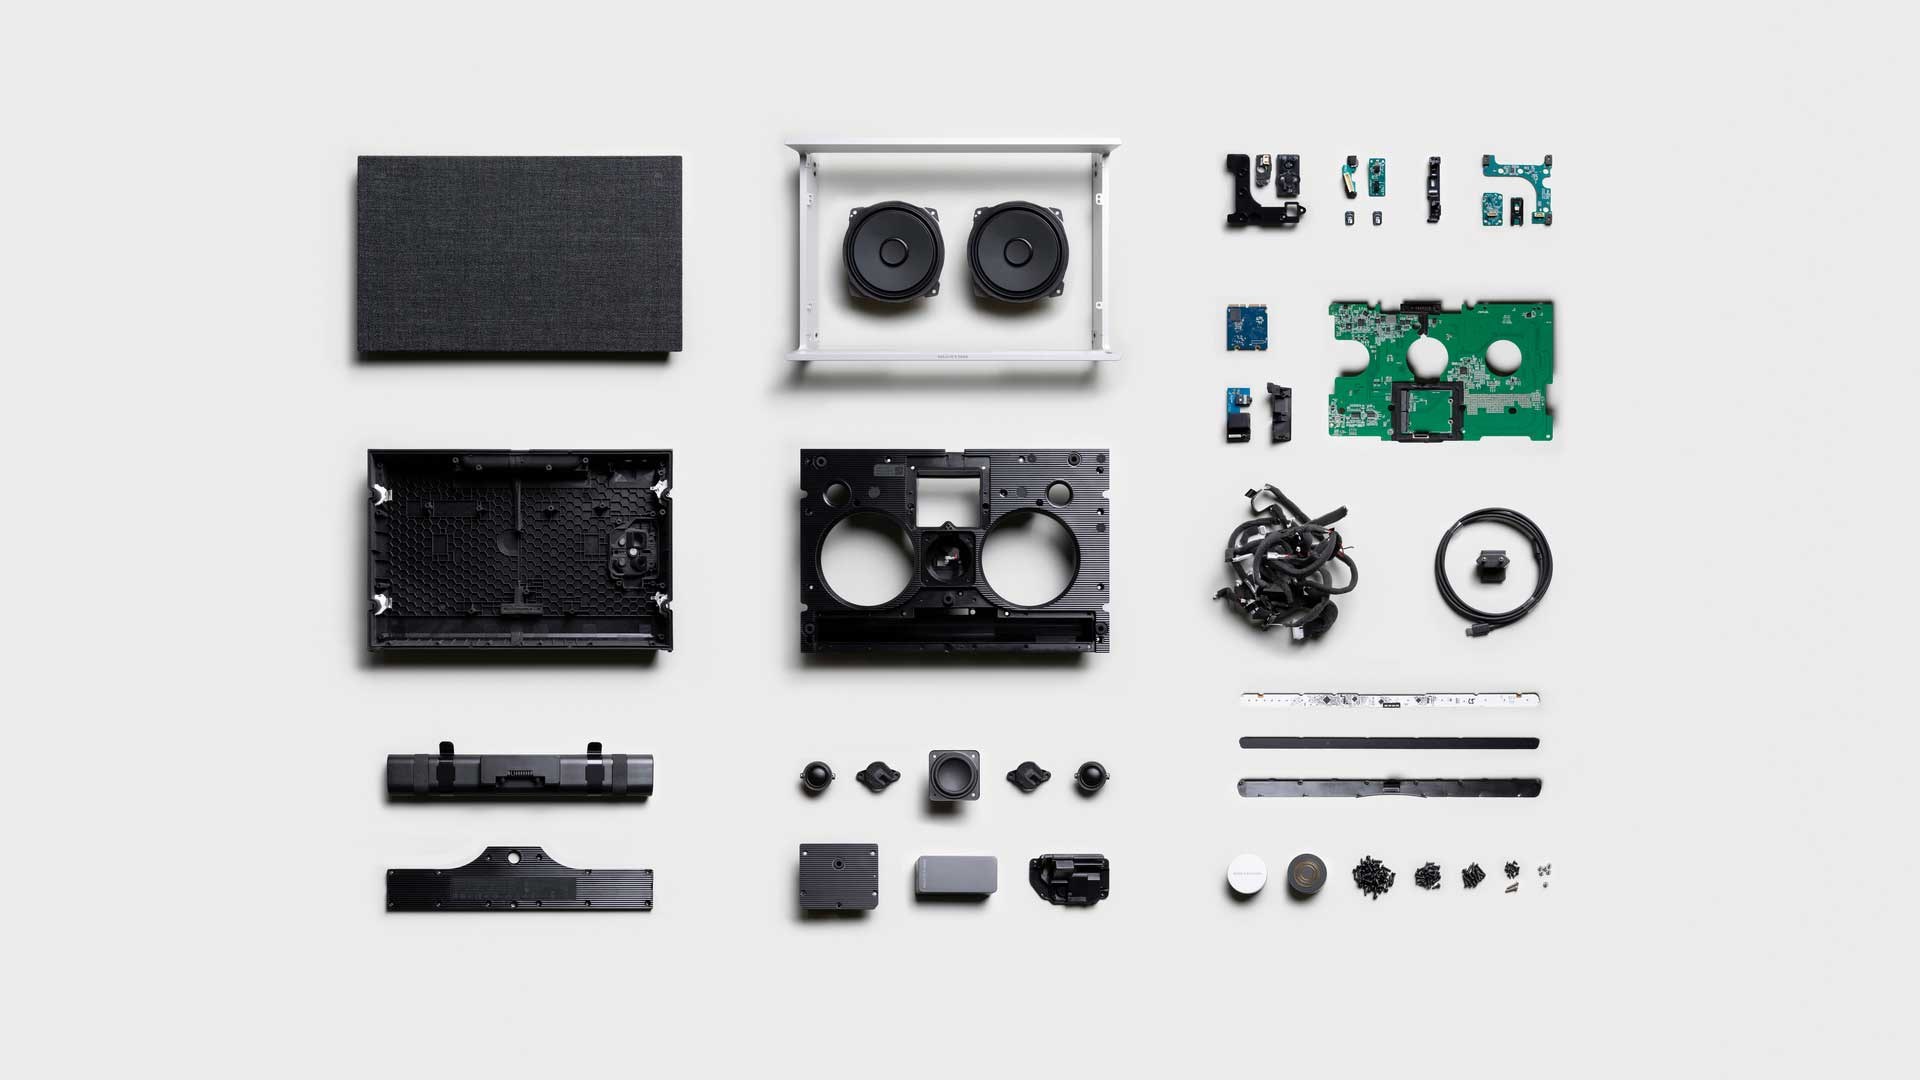 Modular design extends electronic products life